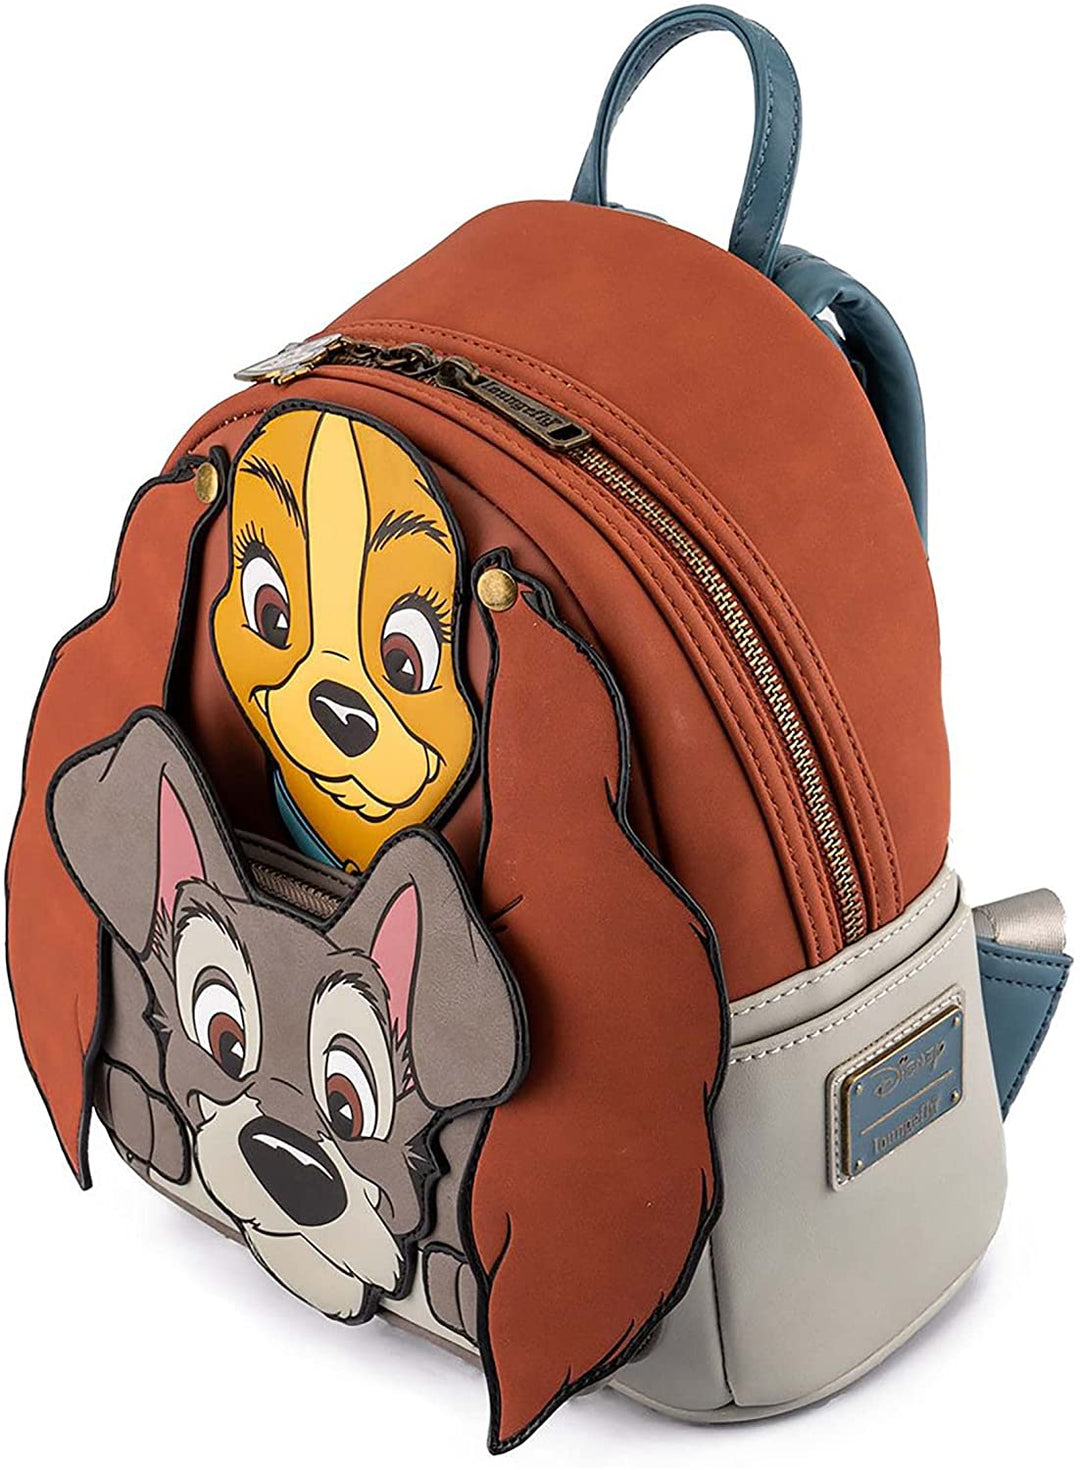 Loungefly Disney Lady and the Tramp Cosplay Mini Backpack